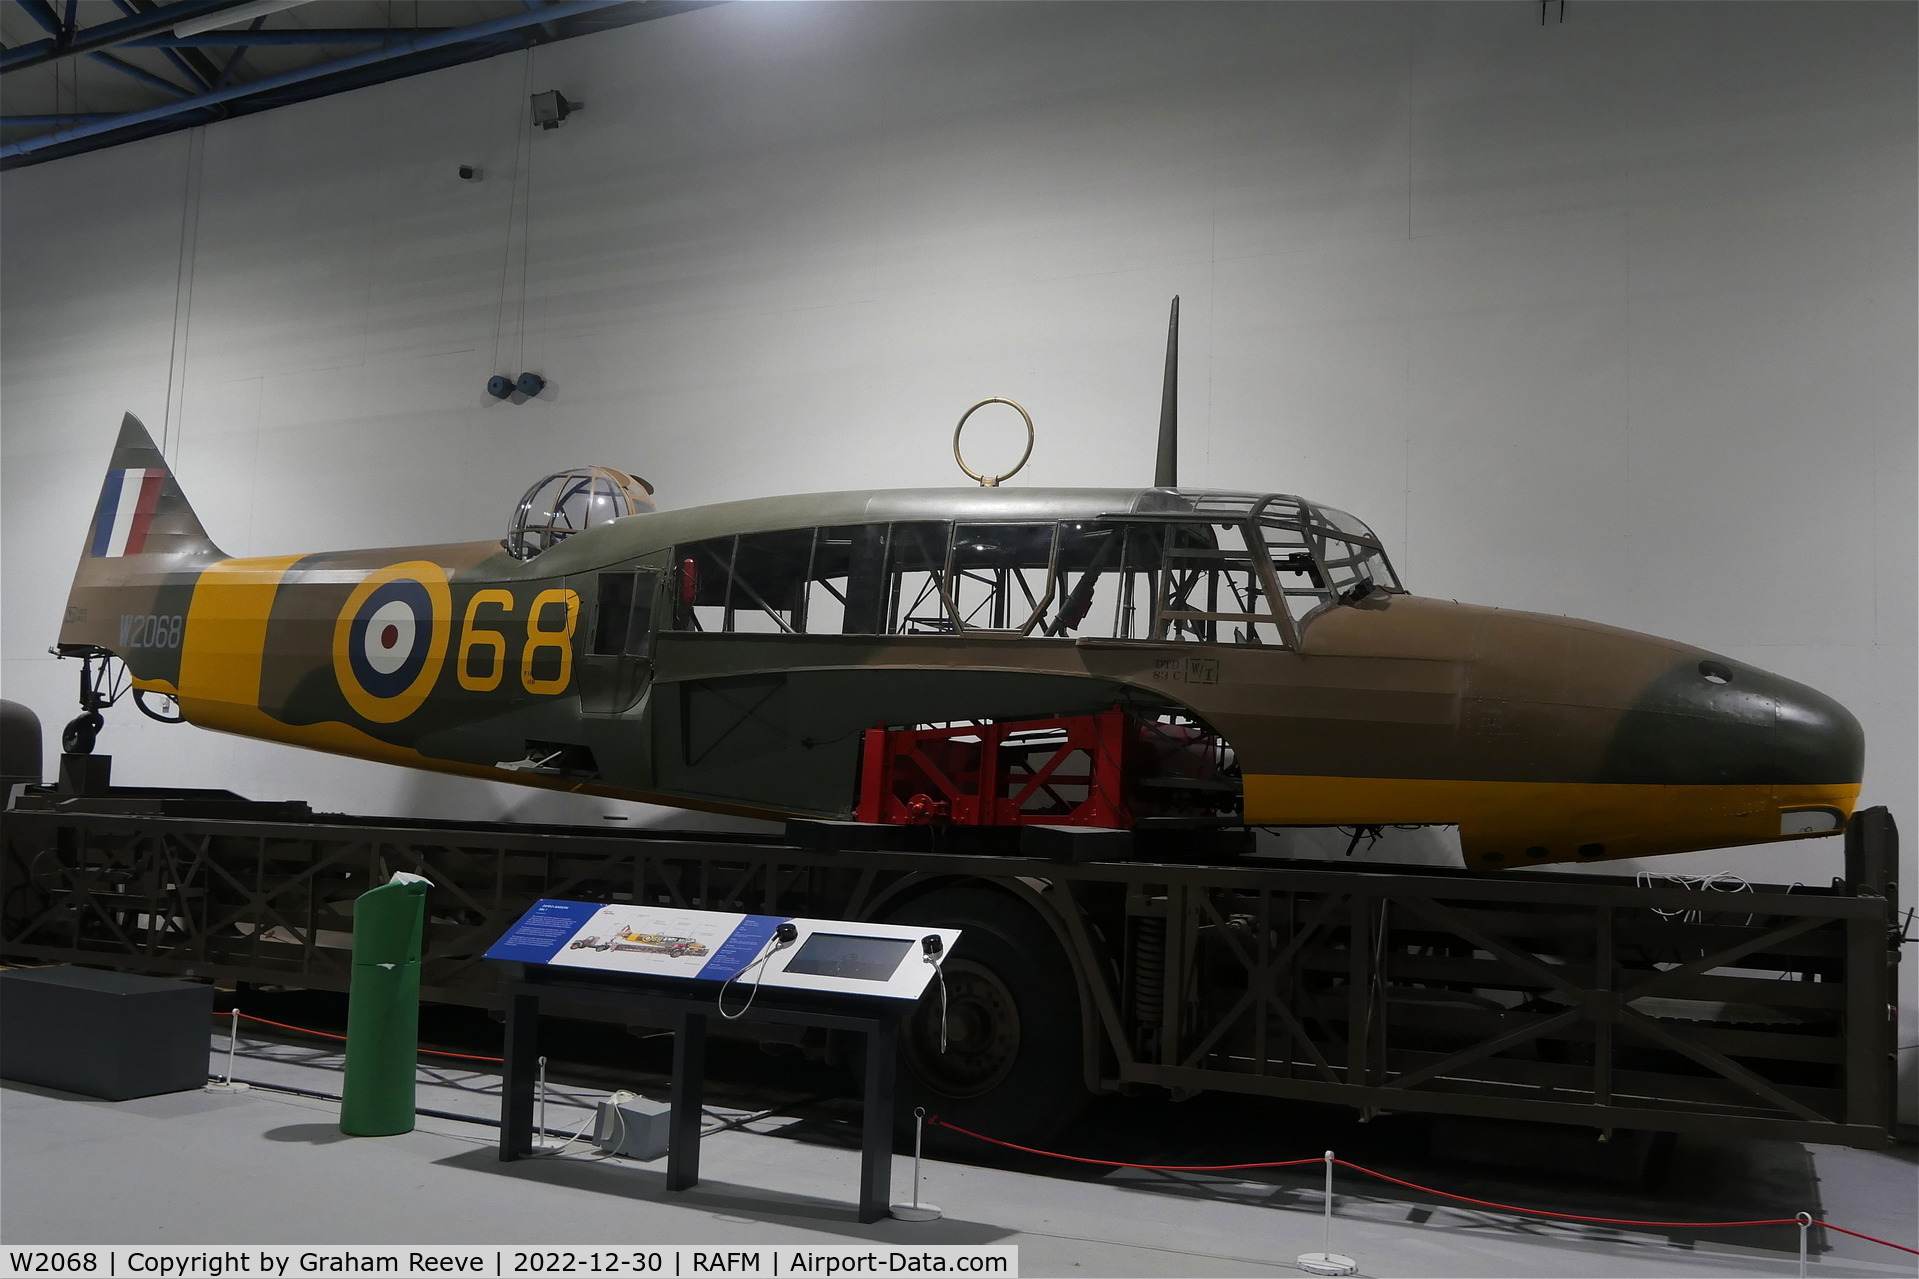 W2068, 1941 Avro 652A Anson 1 C/N Not found W2068, On display at the RAF Museum, Hendon.